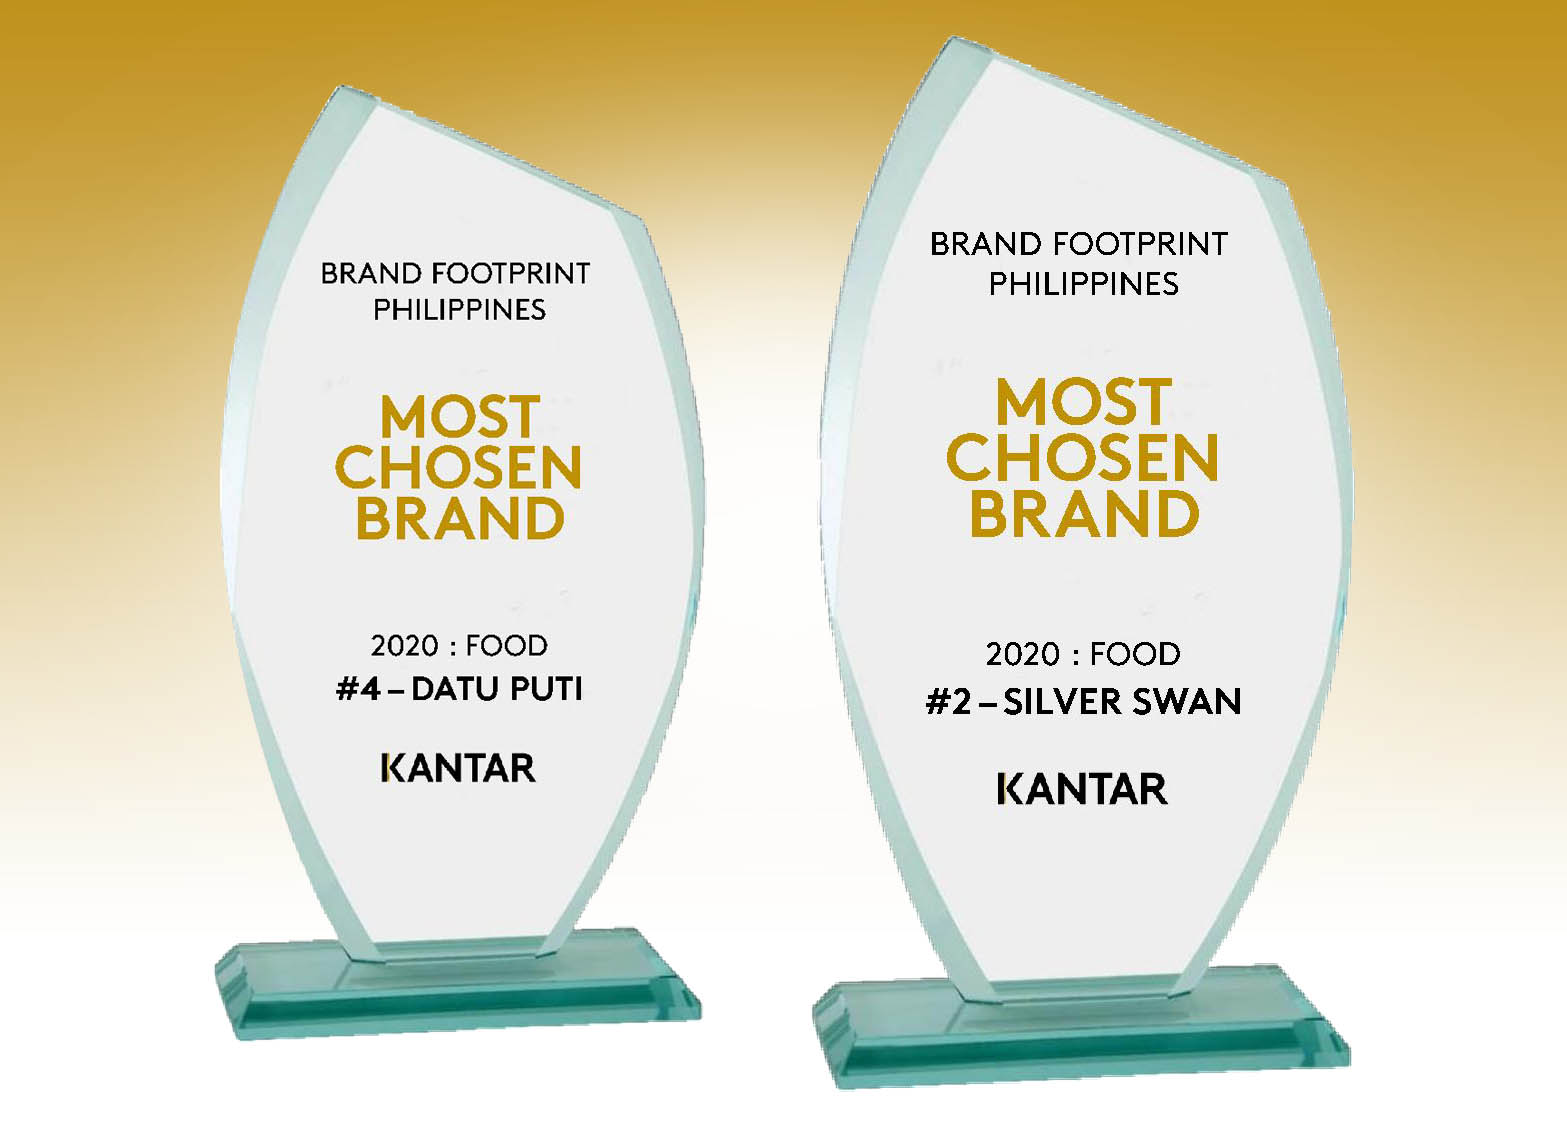 Datu Puti and Silver Swan still ranks as the Most Chosen Food Brands in 2019